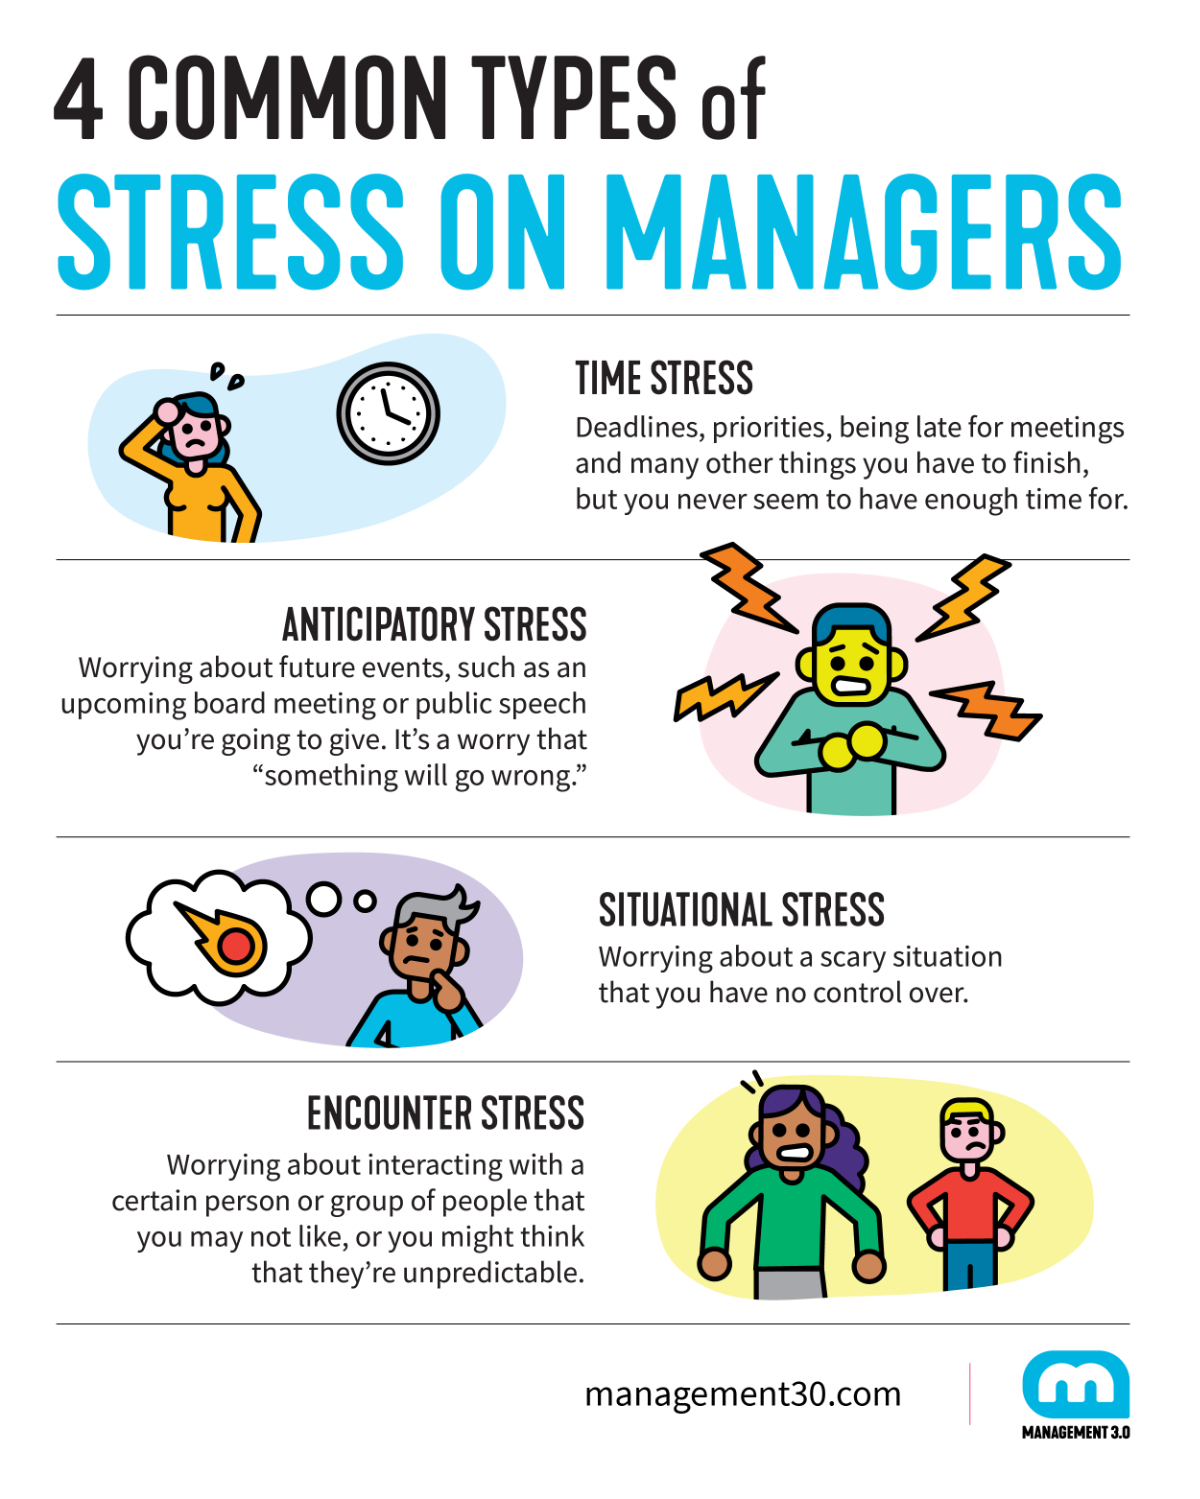 Tips after the age of forty for men - Strategies for Managing Stress Levels